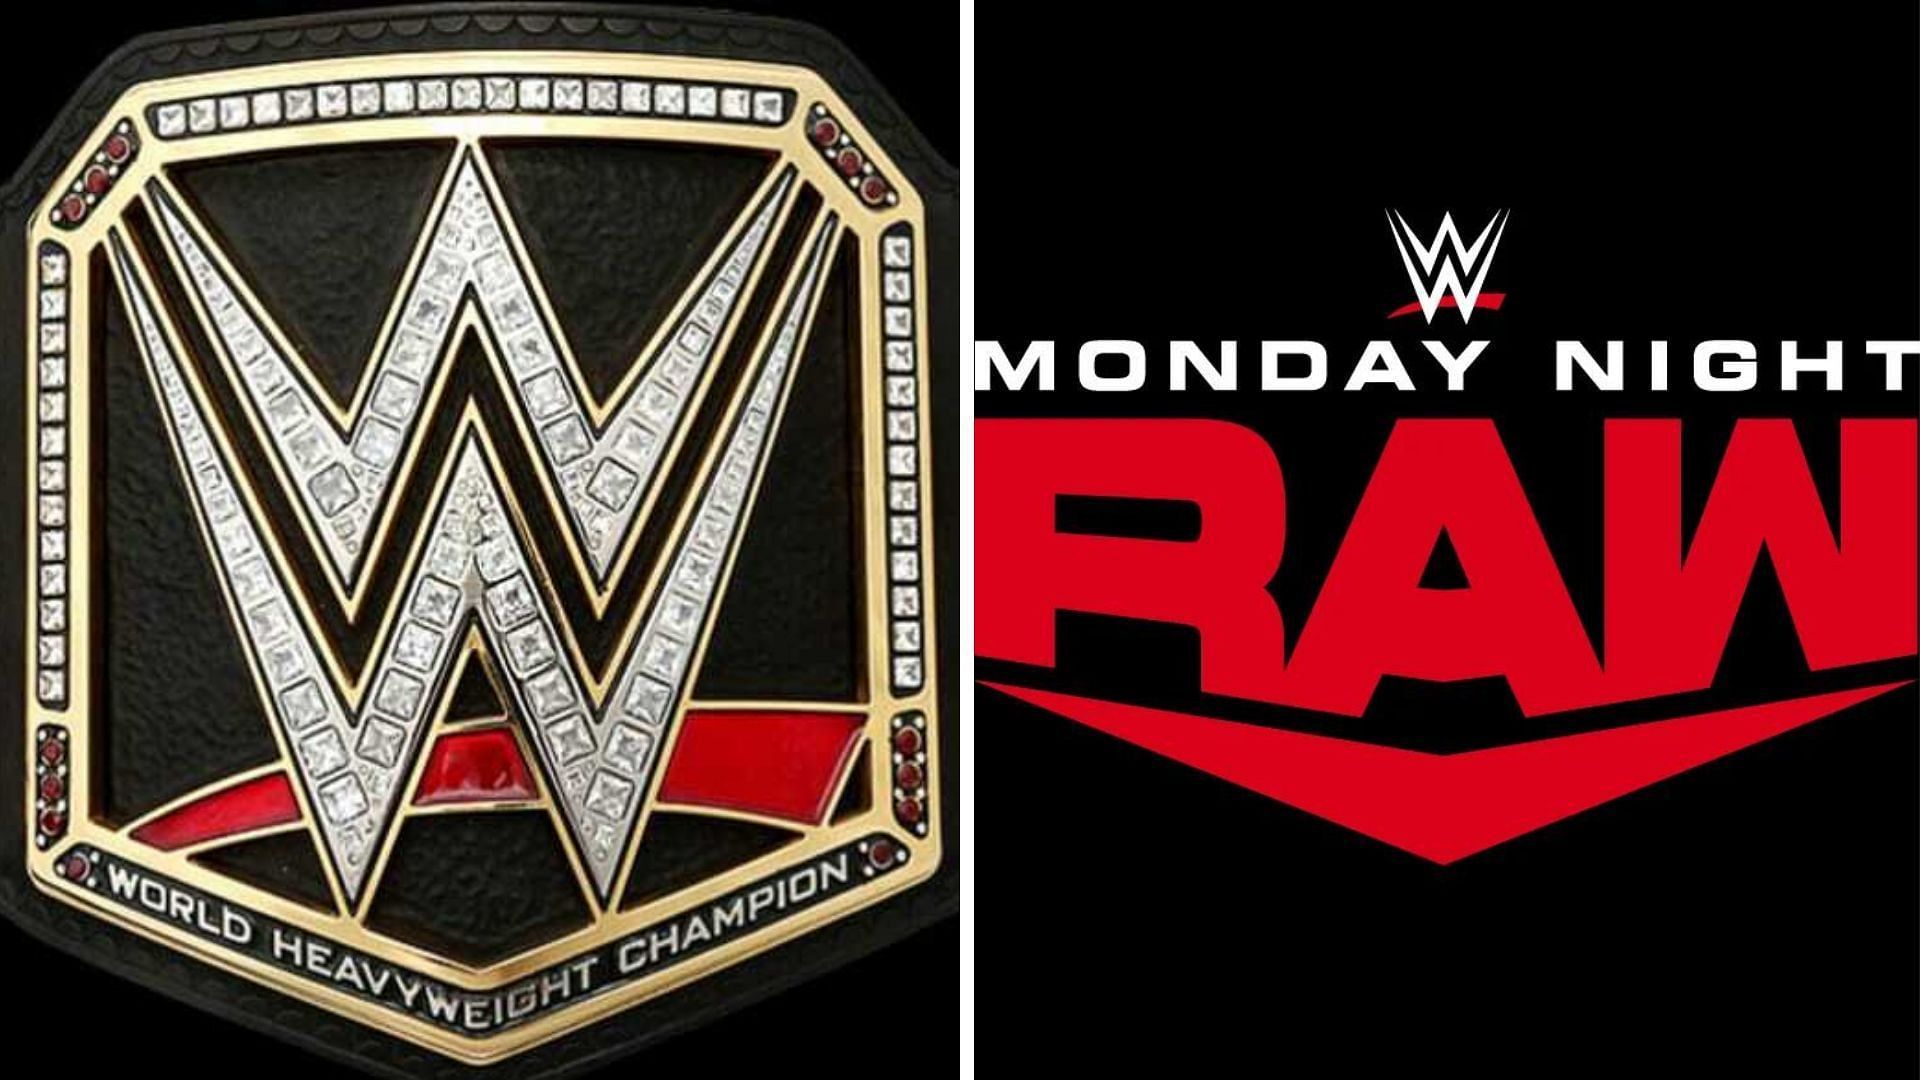 A former champion recently switched brands from SmackDown to WWE RAW.